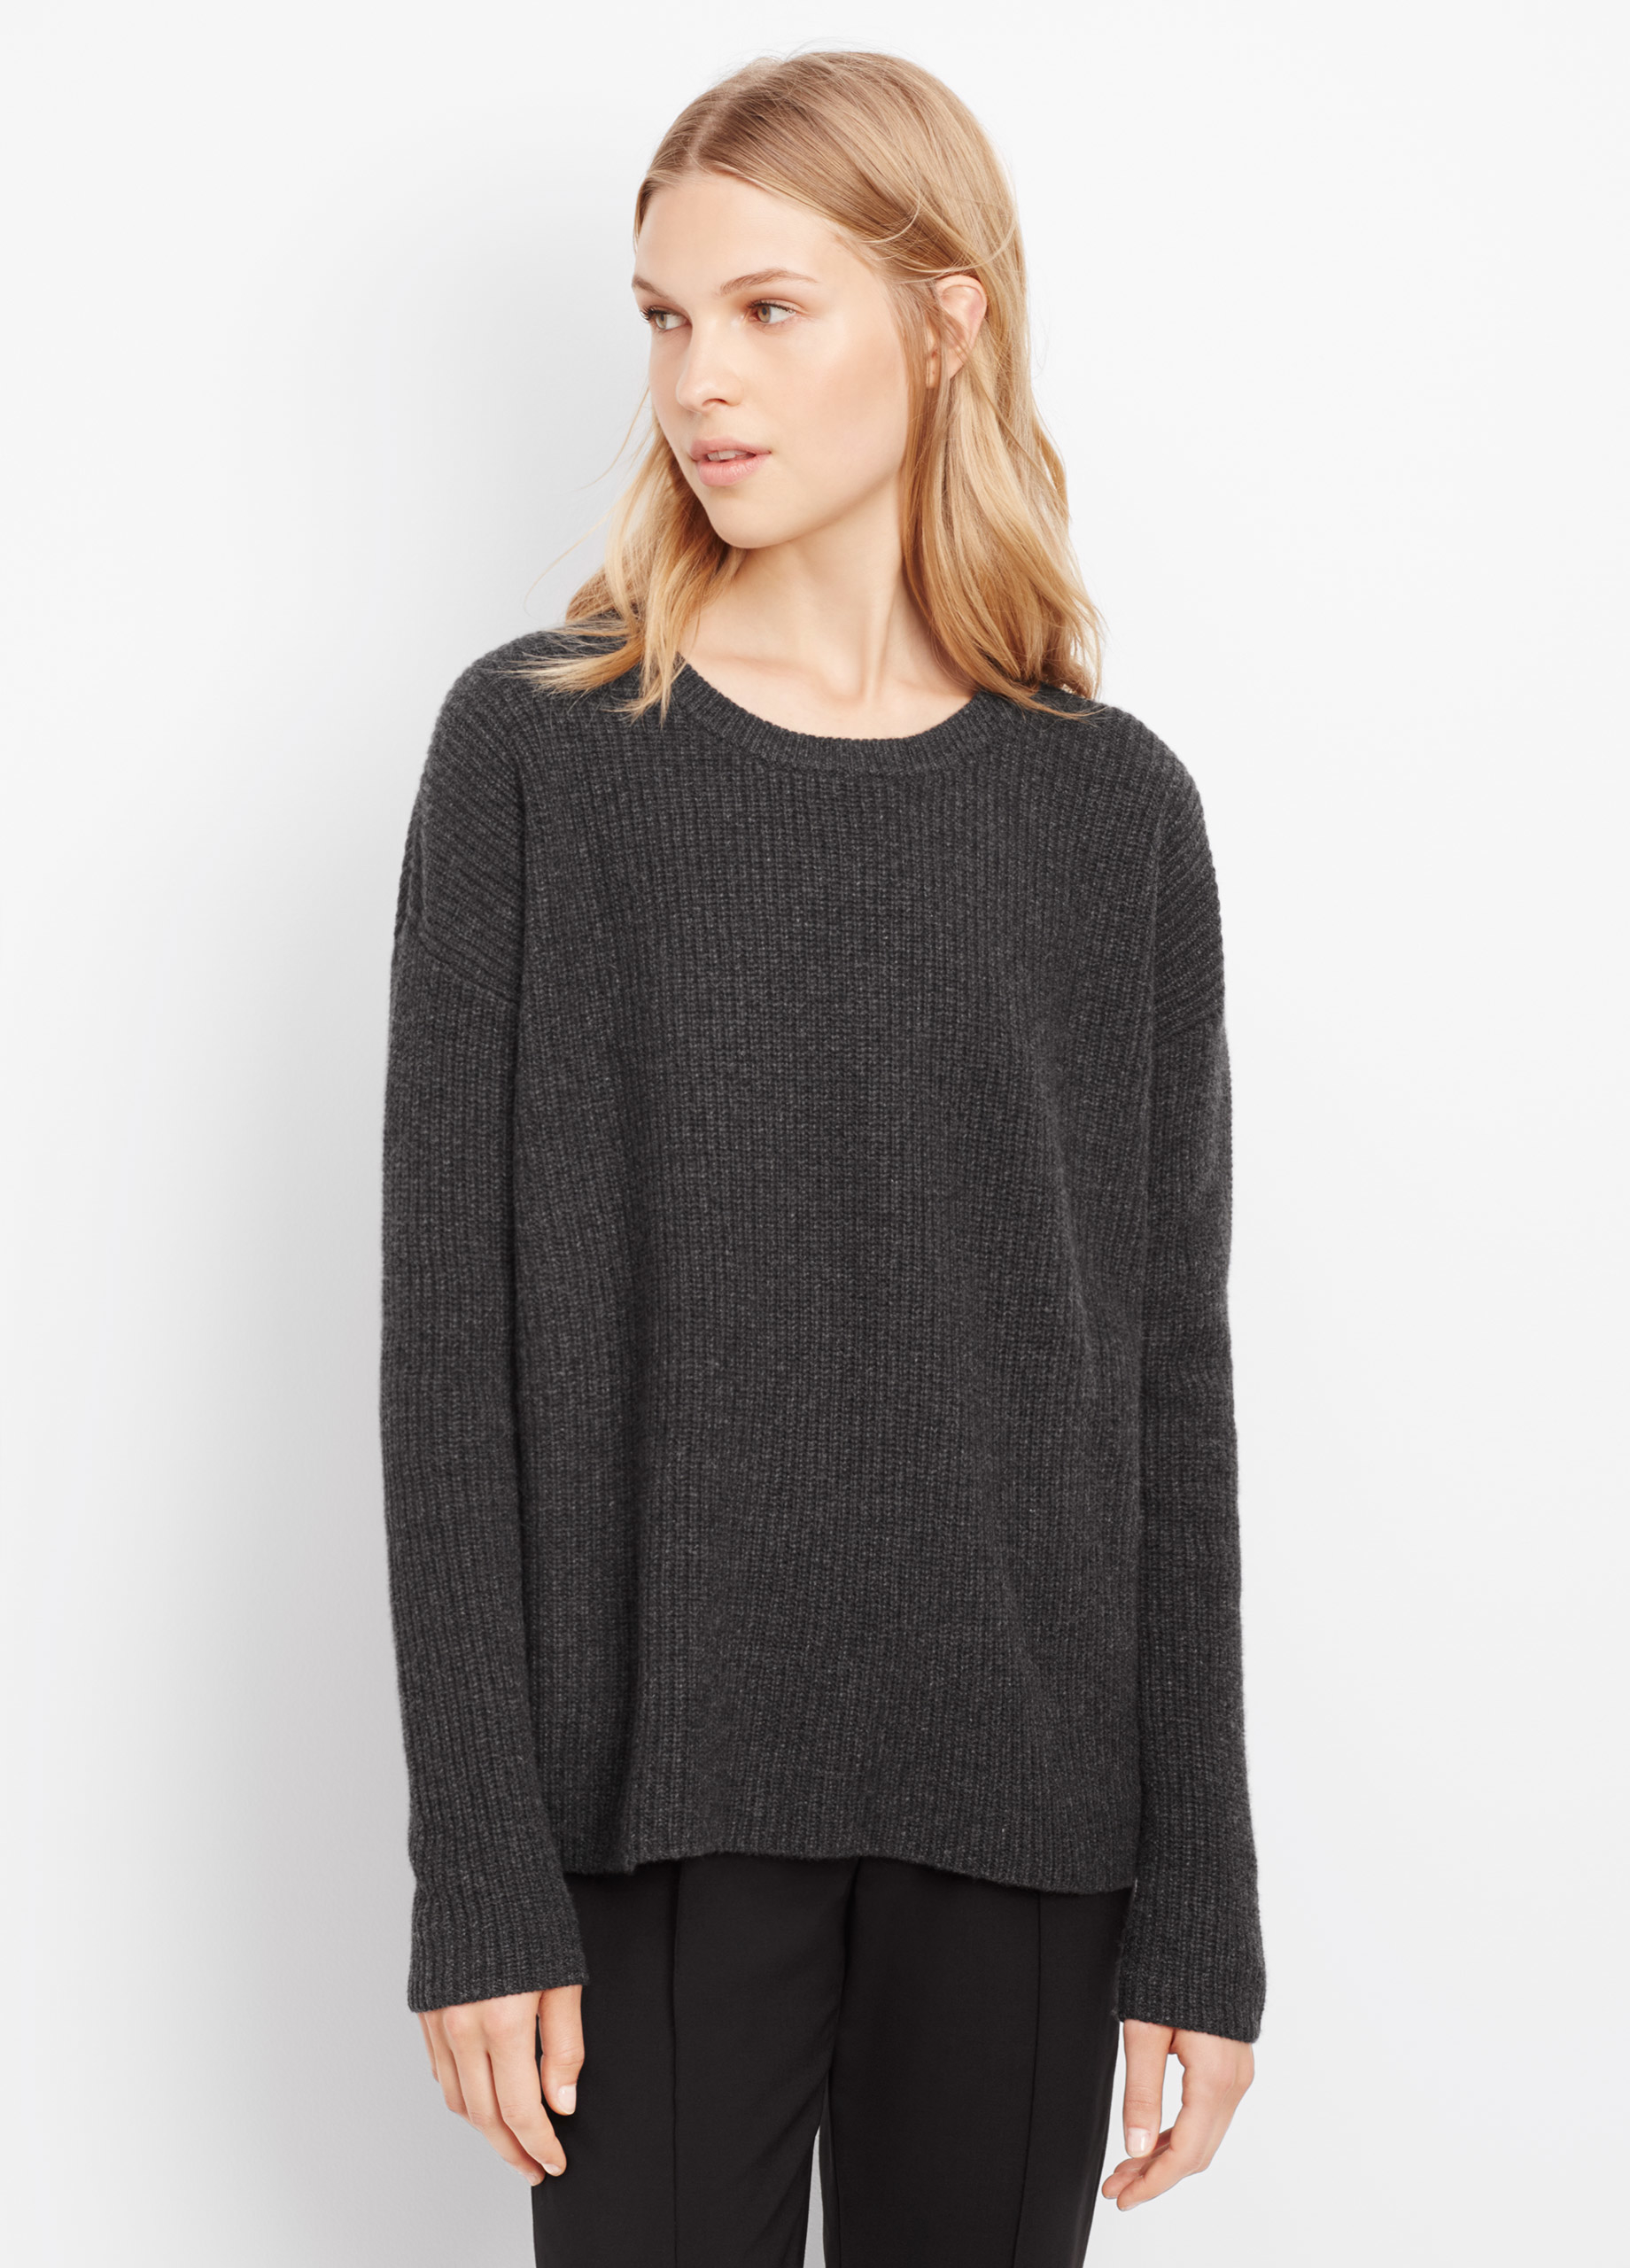 Lyst - Vince Cashmere Ribbed Crew Neck Sweater in Gray